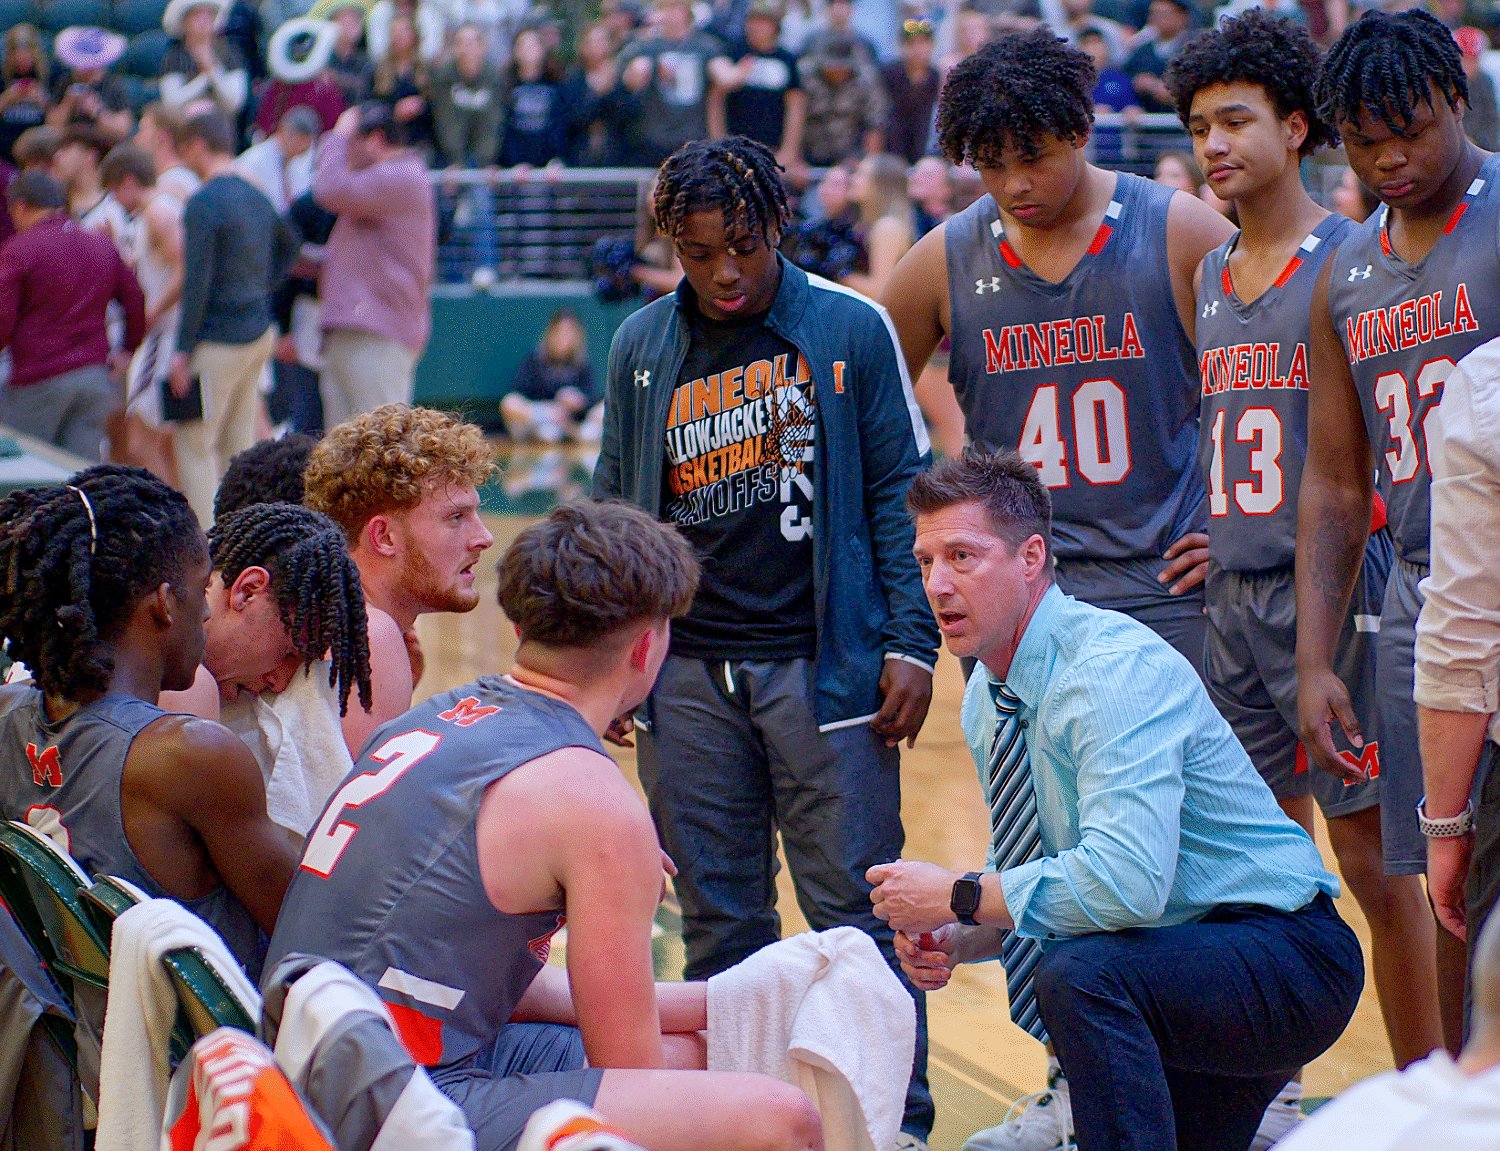 Mineola head coach Ryan Steadman guides the Yellowjackets during a timeout.